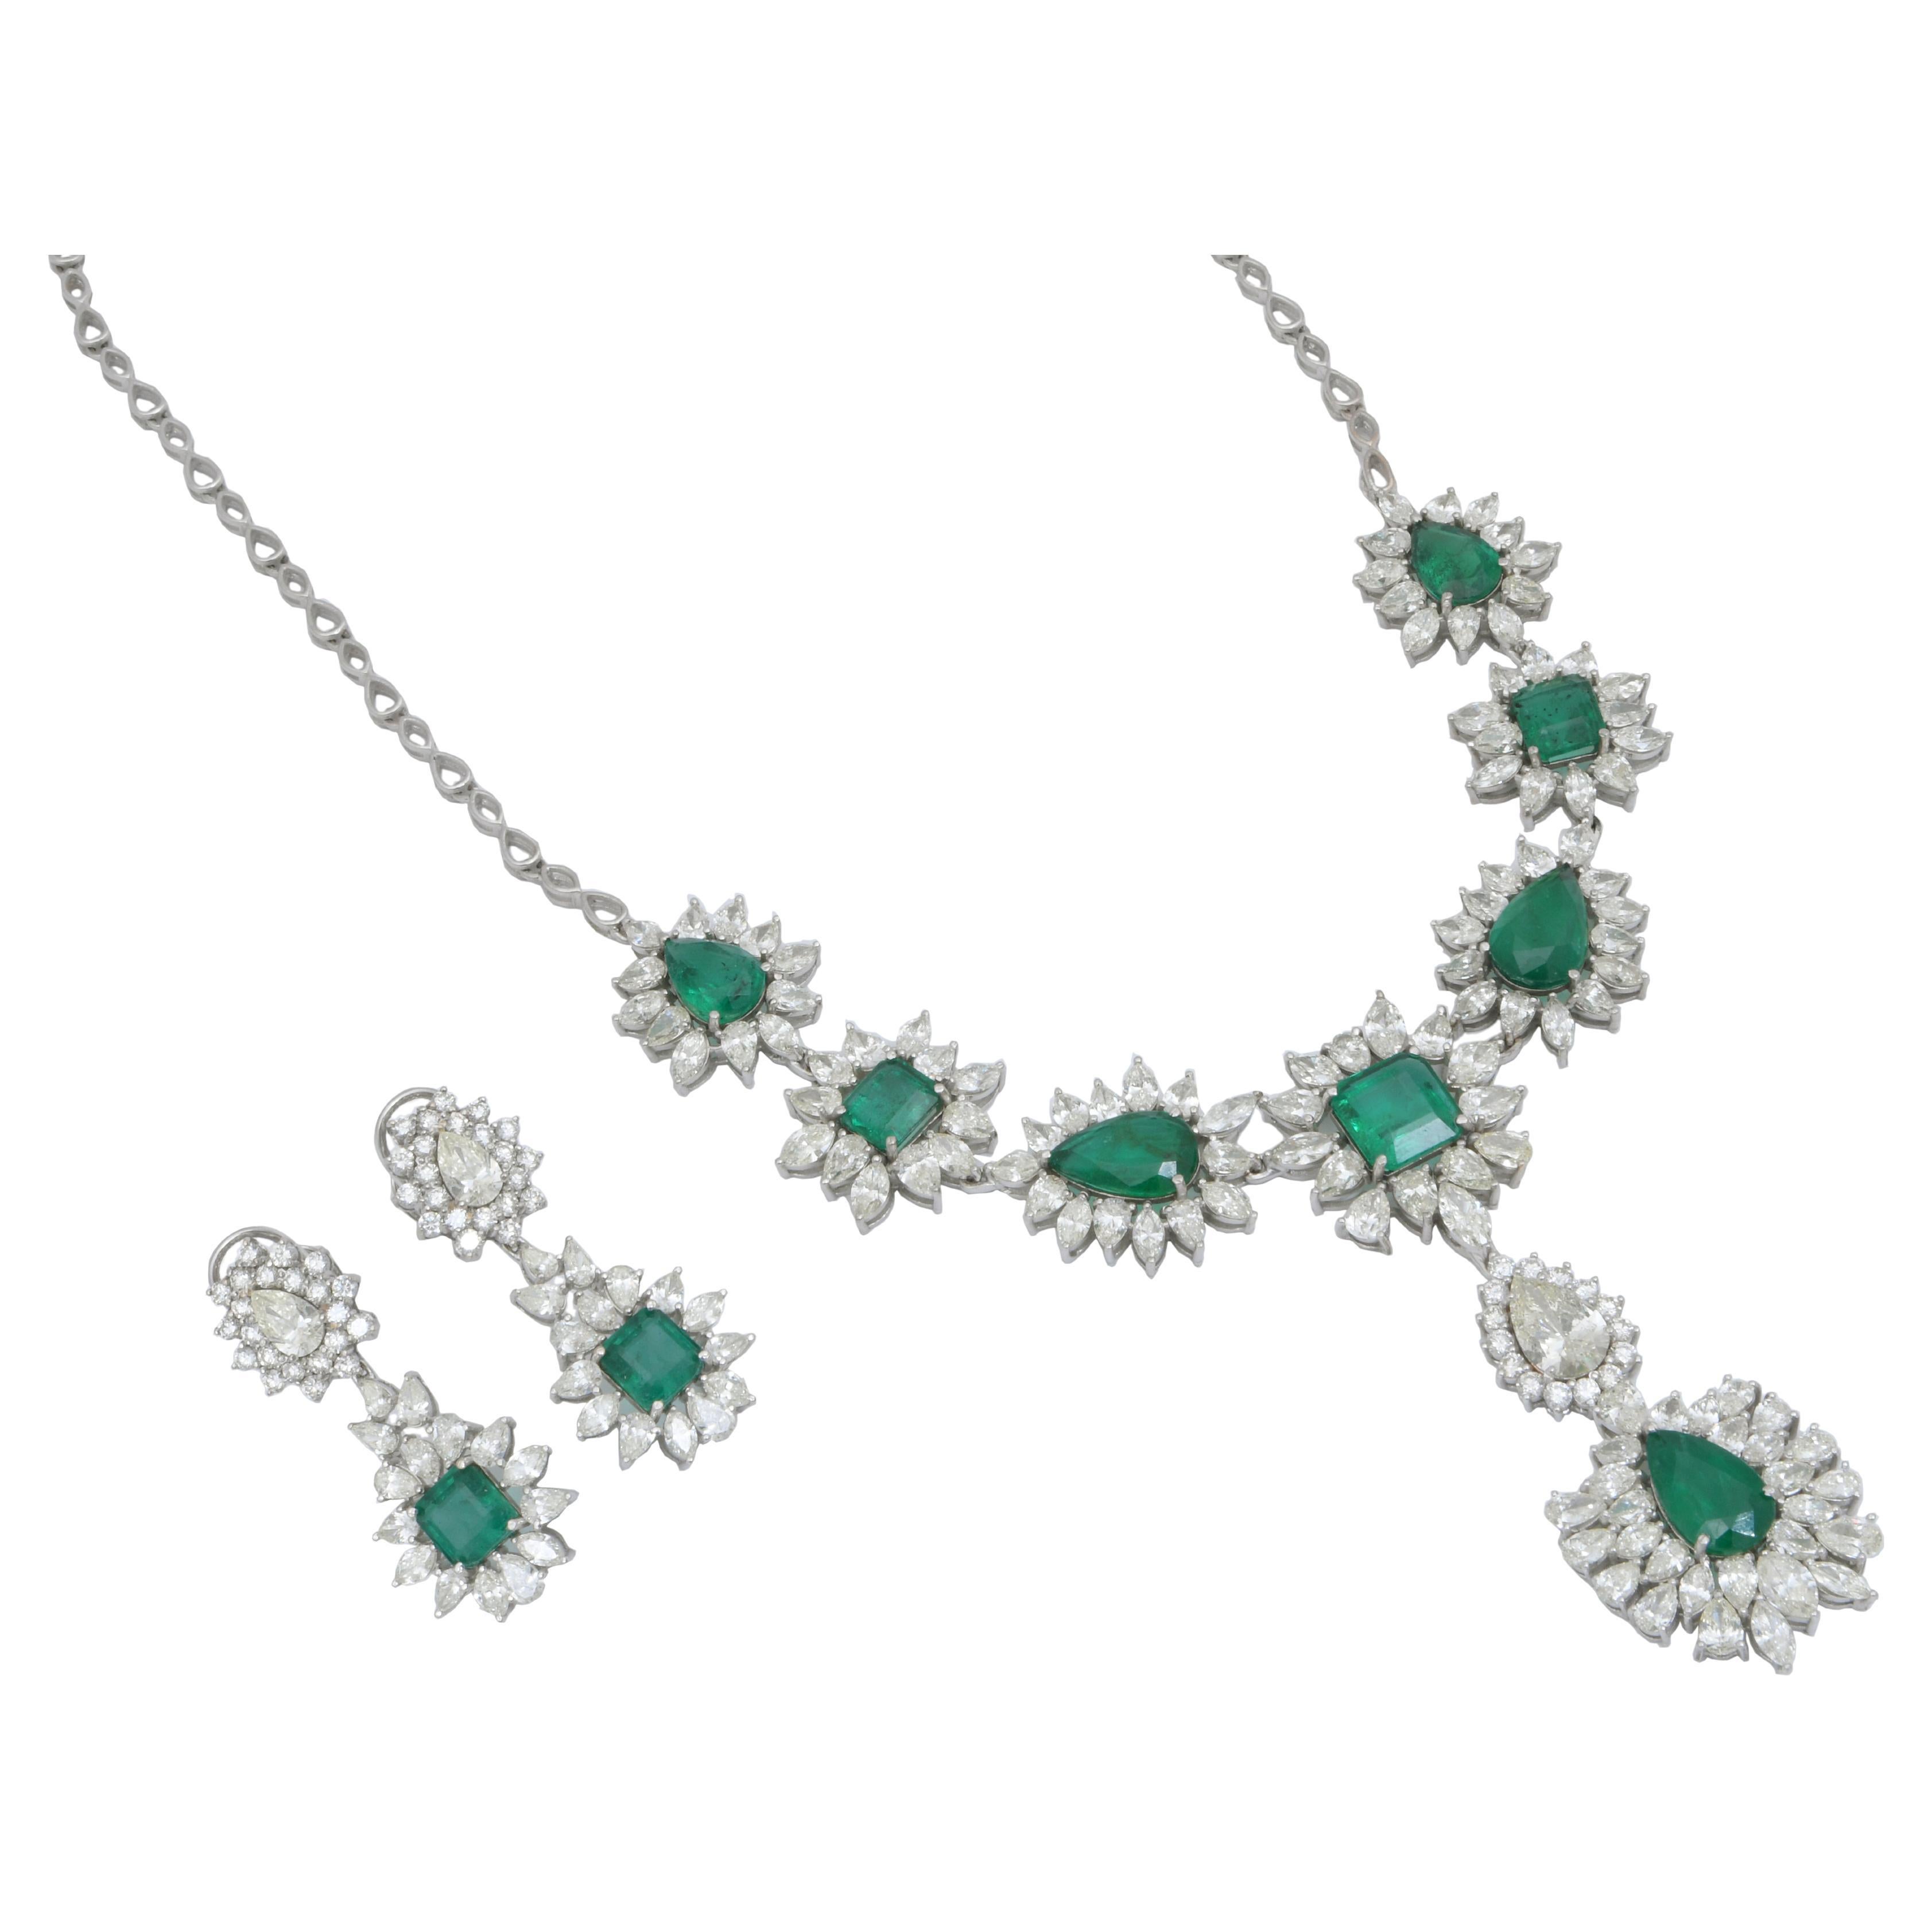 Natural Emerald Necklace with 36.29cts Diamond & 28.53cts Emerald in 14k Gold